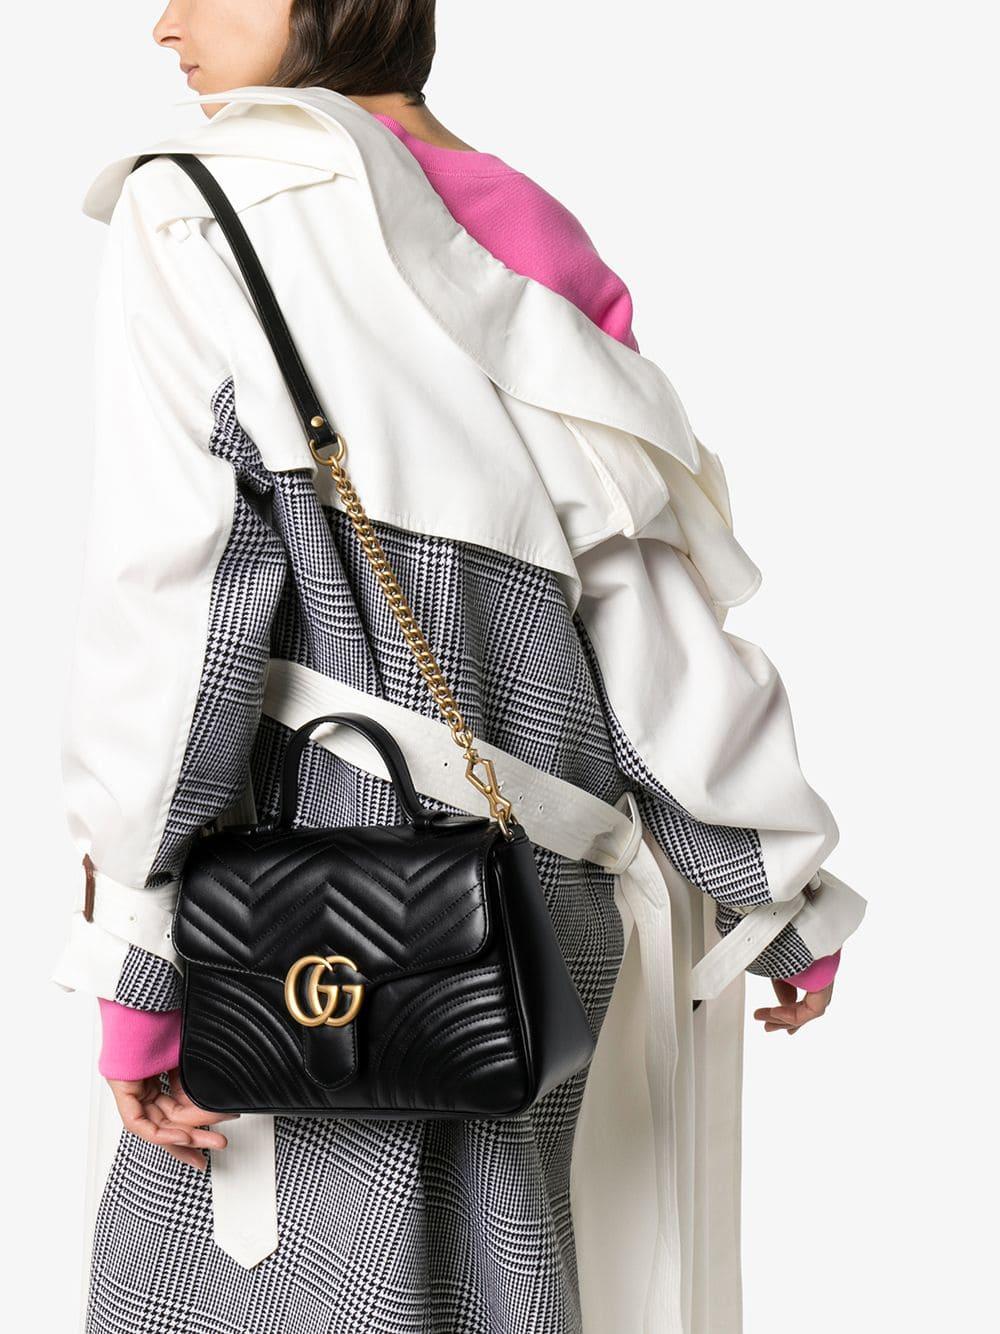 Gucci Black GG Marmont Small Top Handle Bag - Save 45% - Lyst